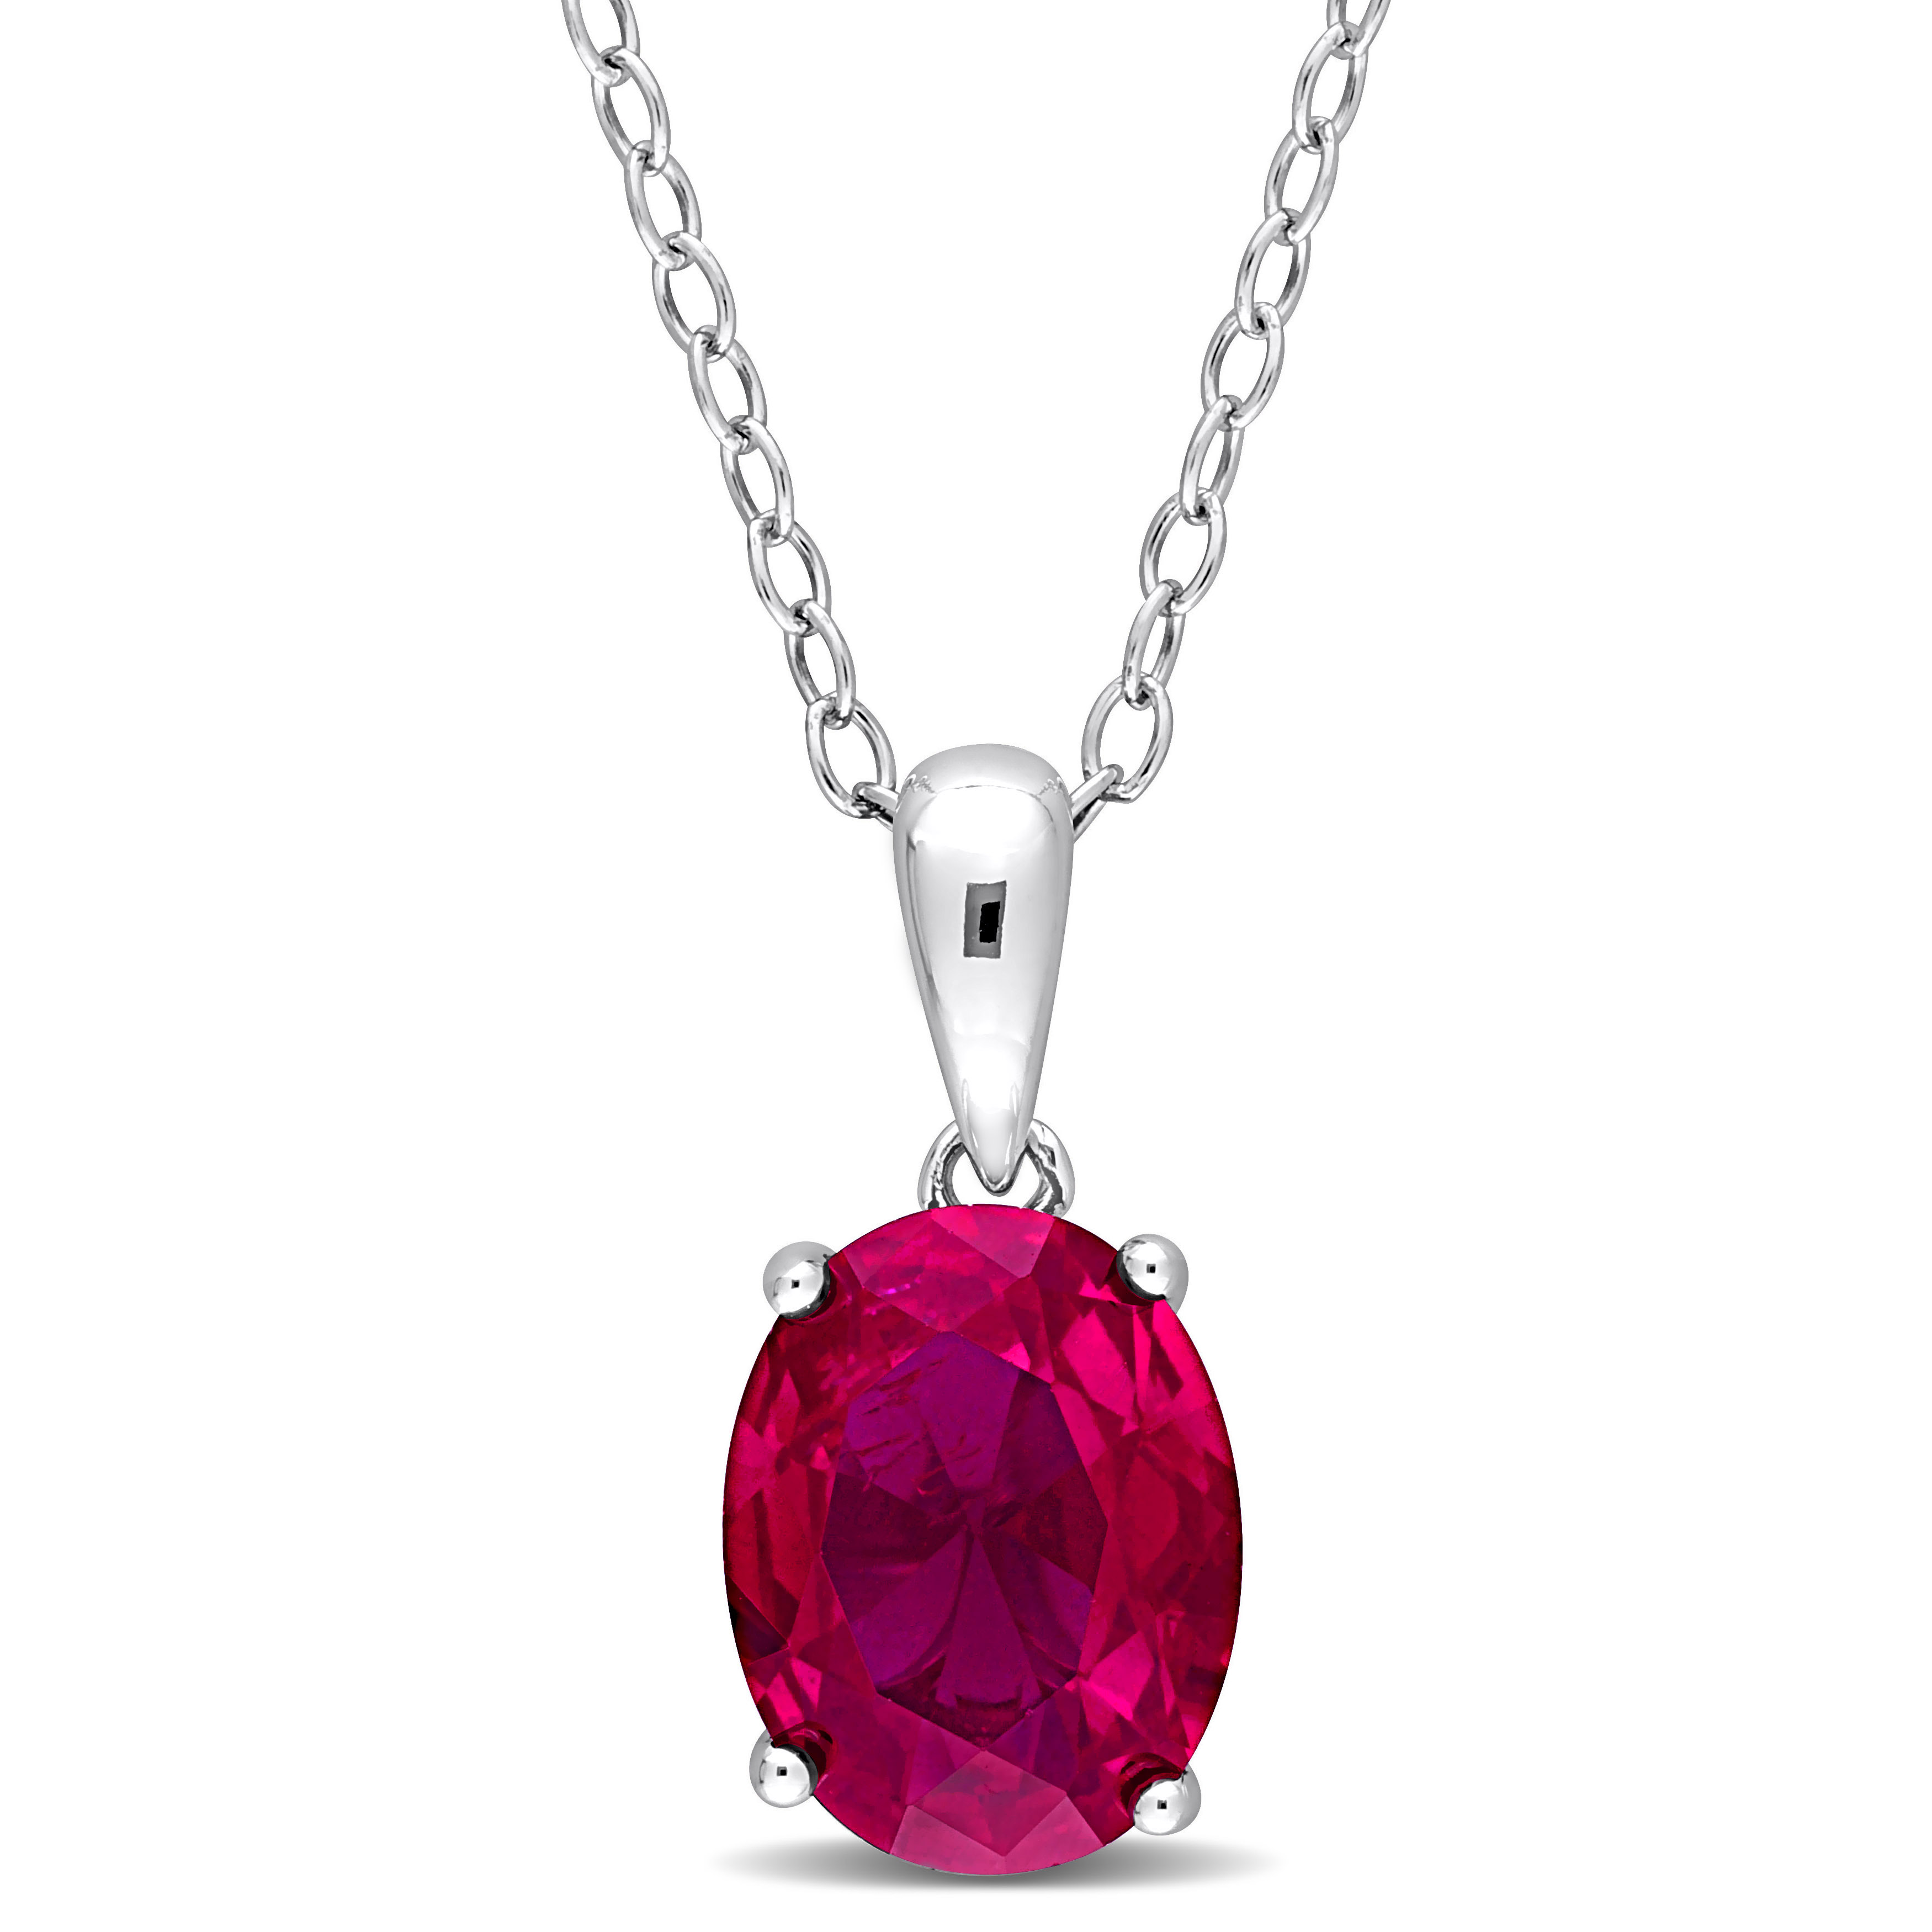 3 CT TGW Oval Created Ruby Solitaire Heart Design Pendant with Chain in Sterling Silver - 18 in.